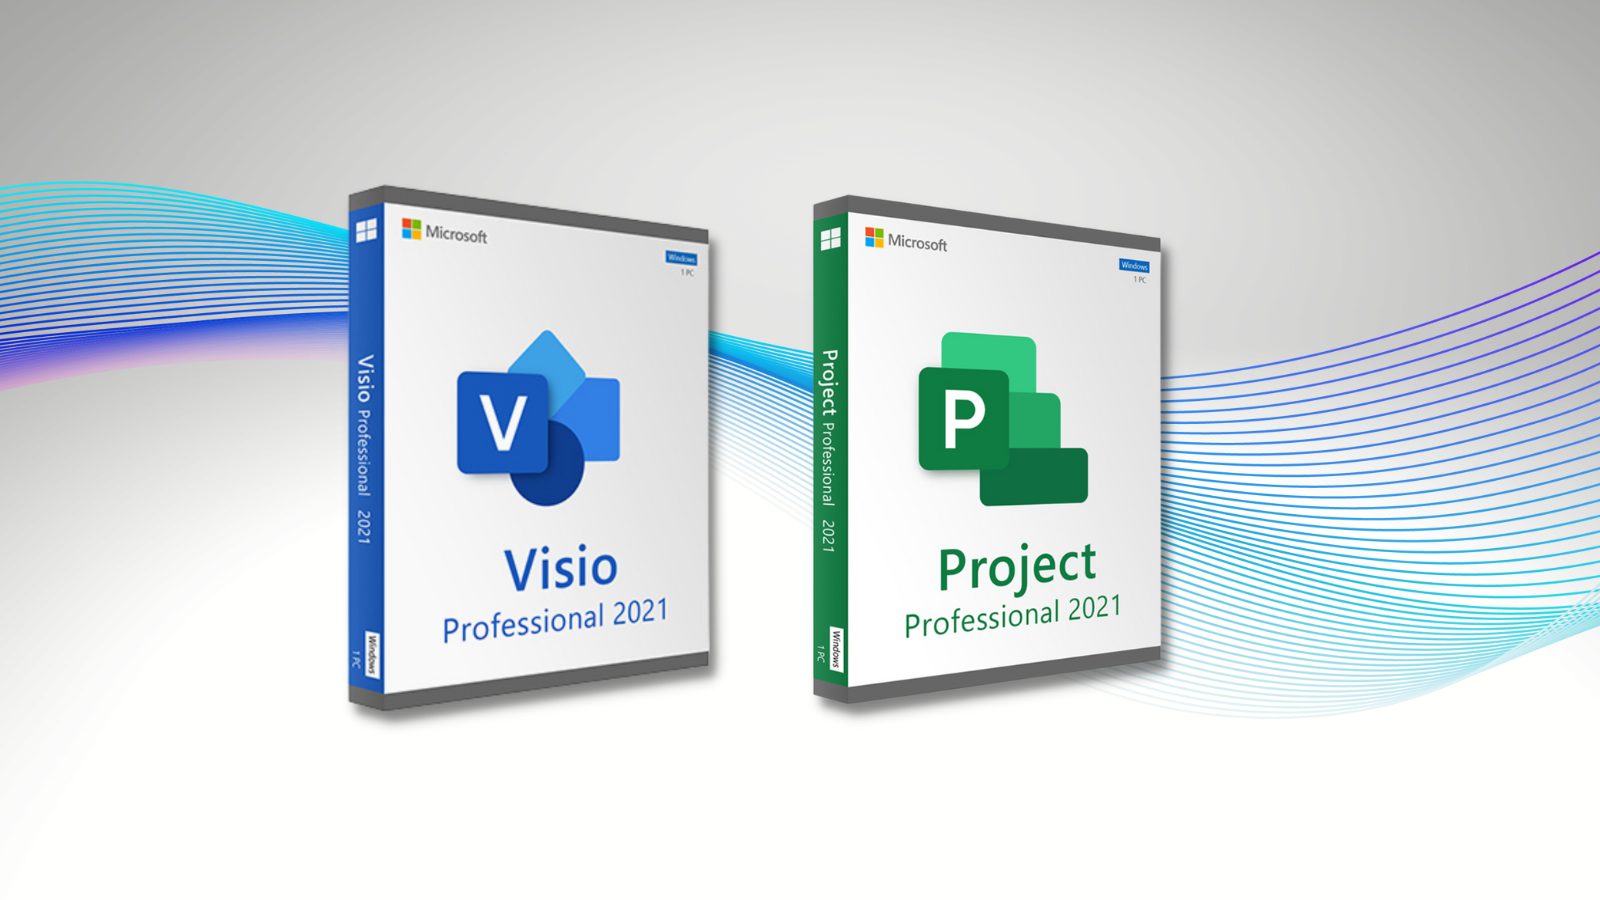 Microsoft Visio and Project Professional 2021 with colorful background graphic